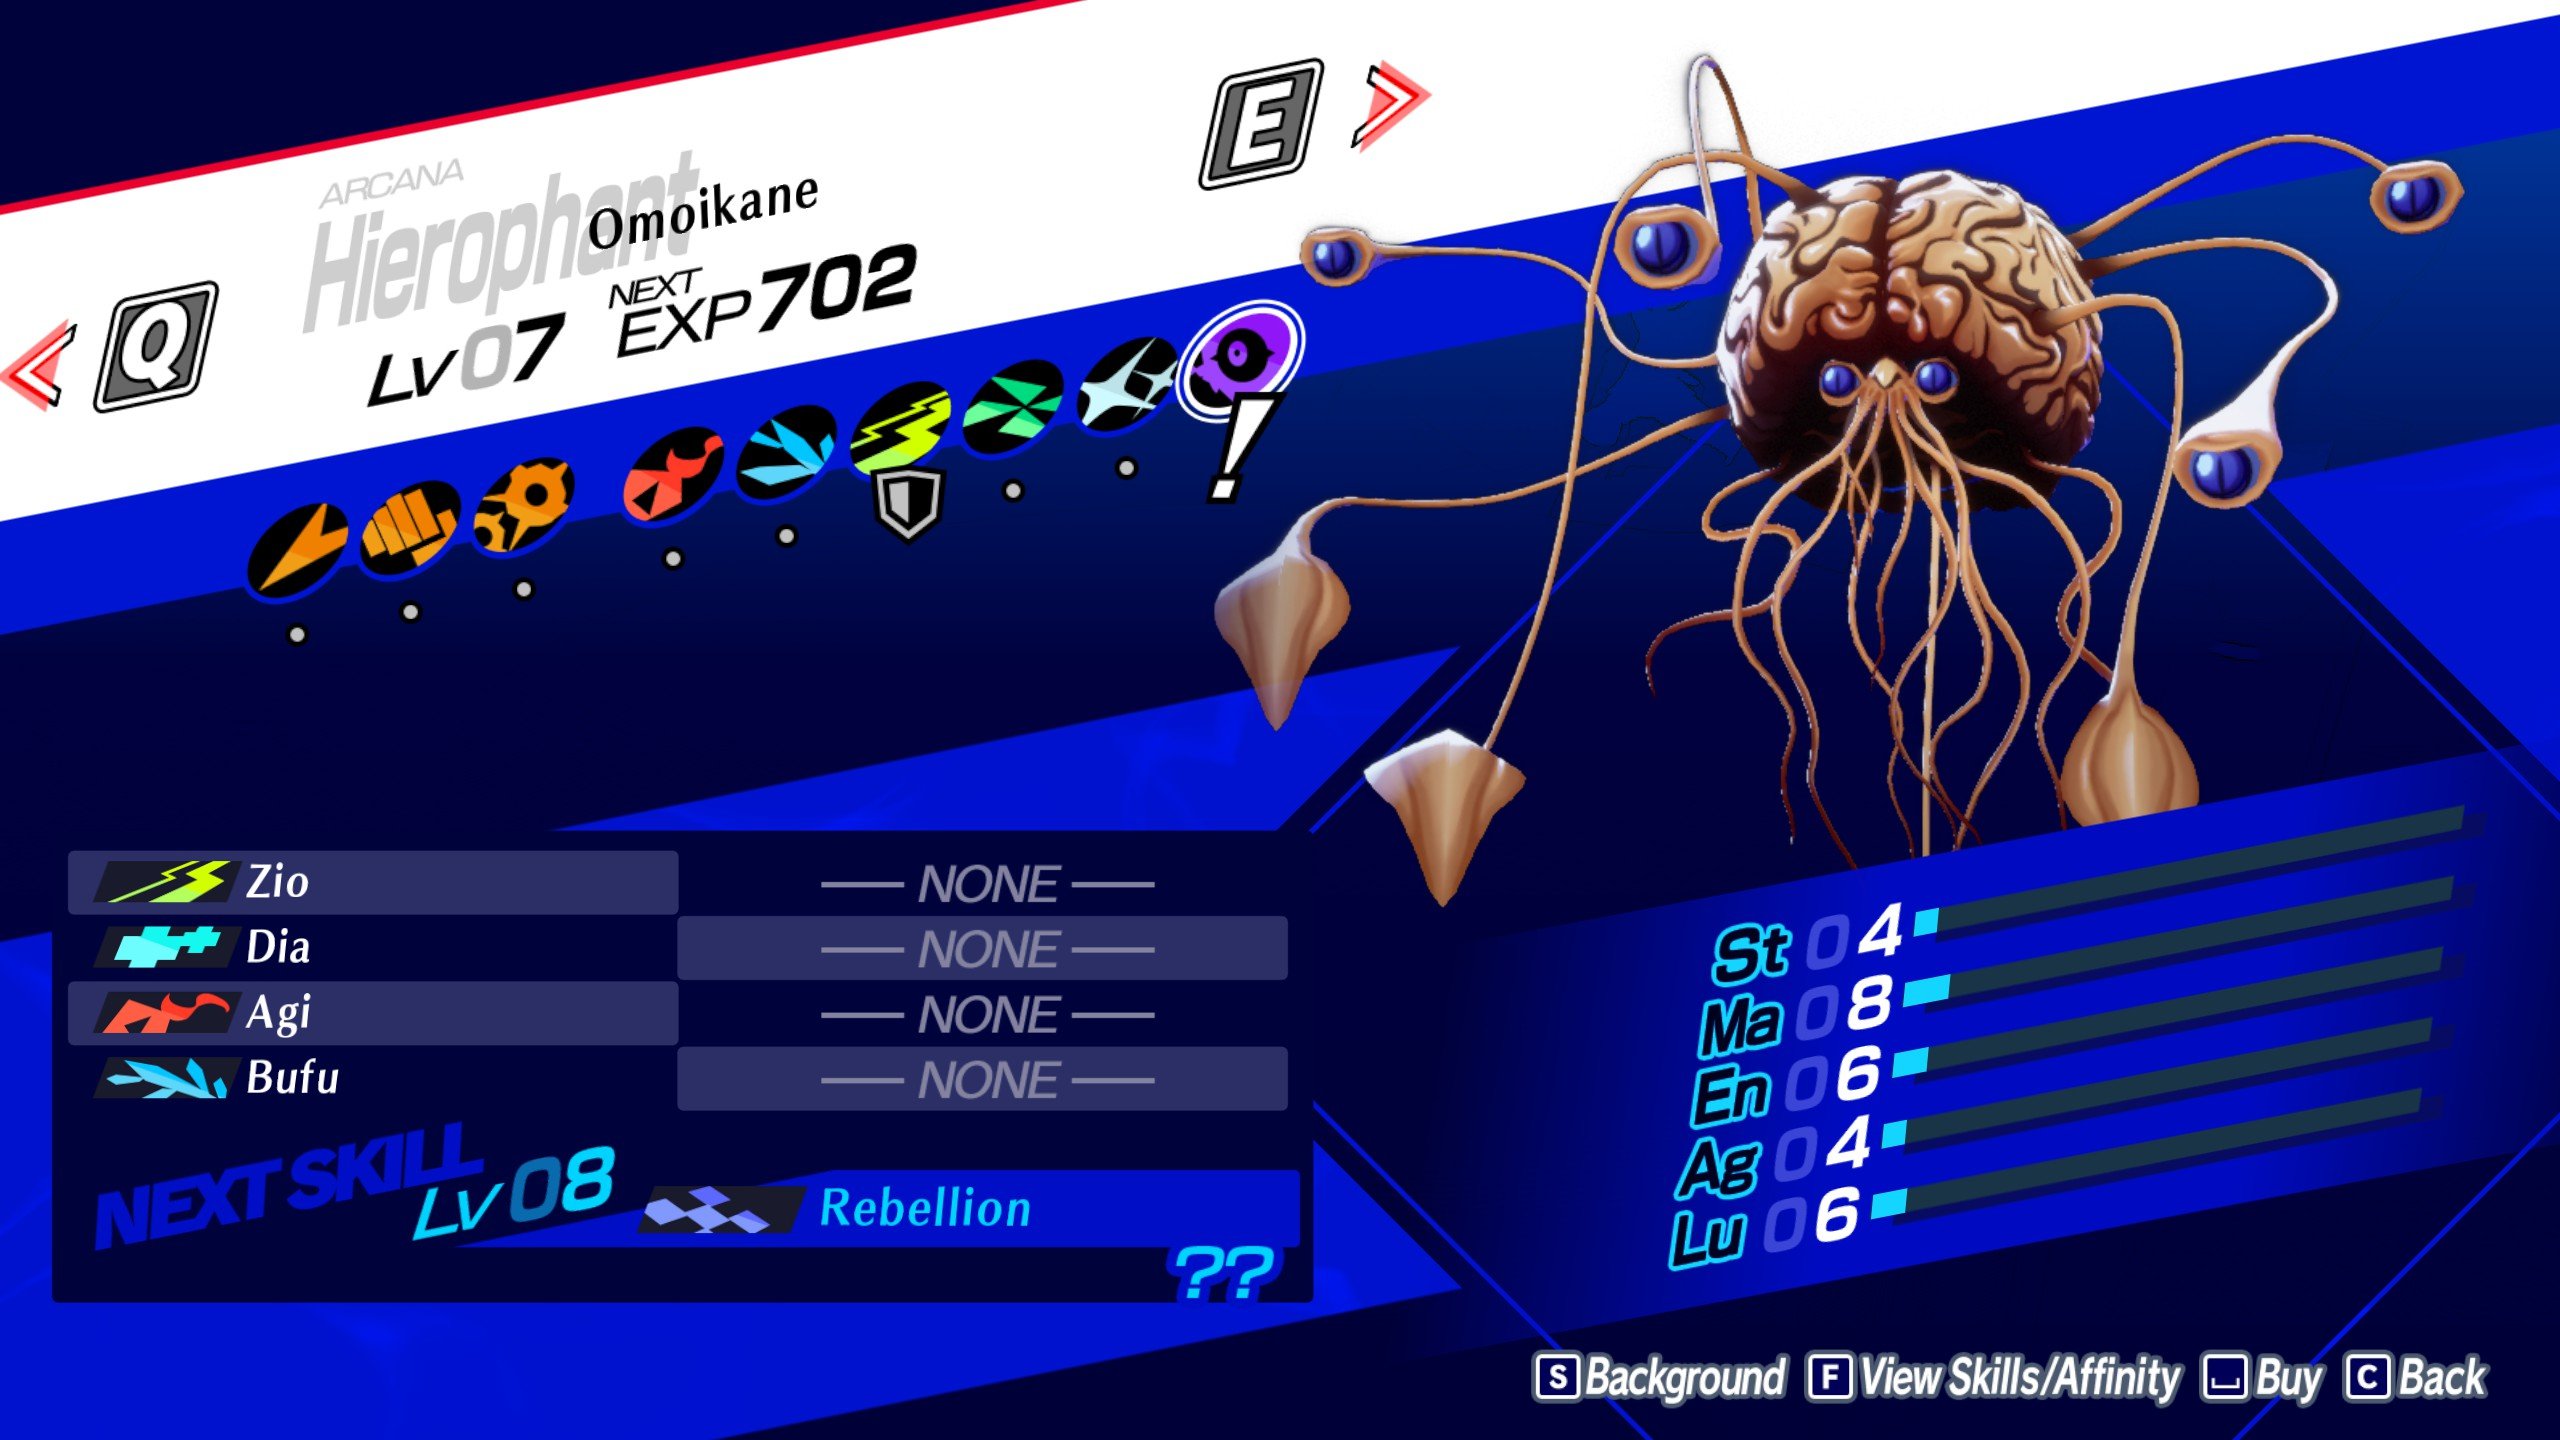 An image showcasing the Hierophant Arcana in Persona 3 Reload.